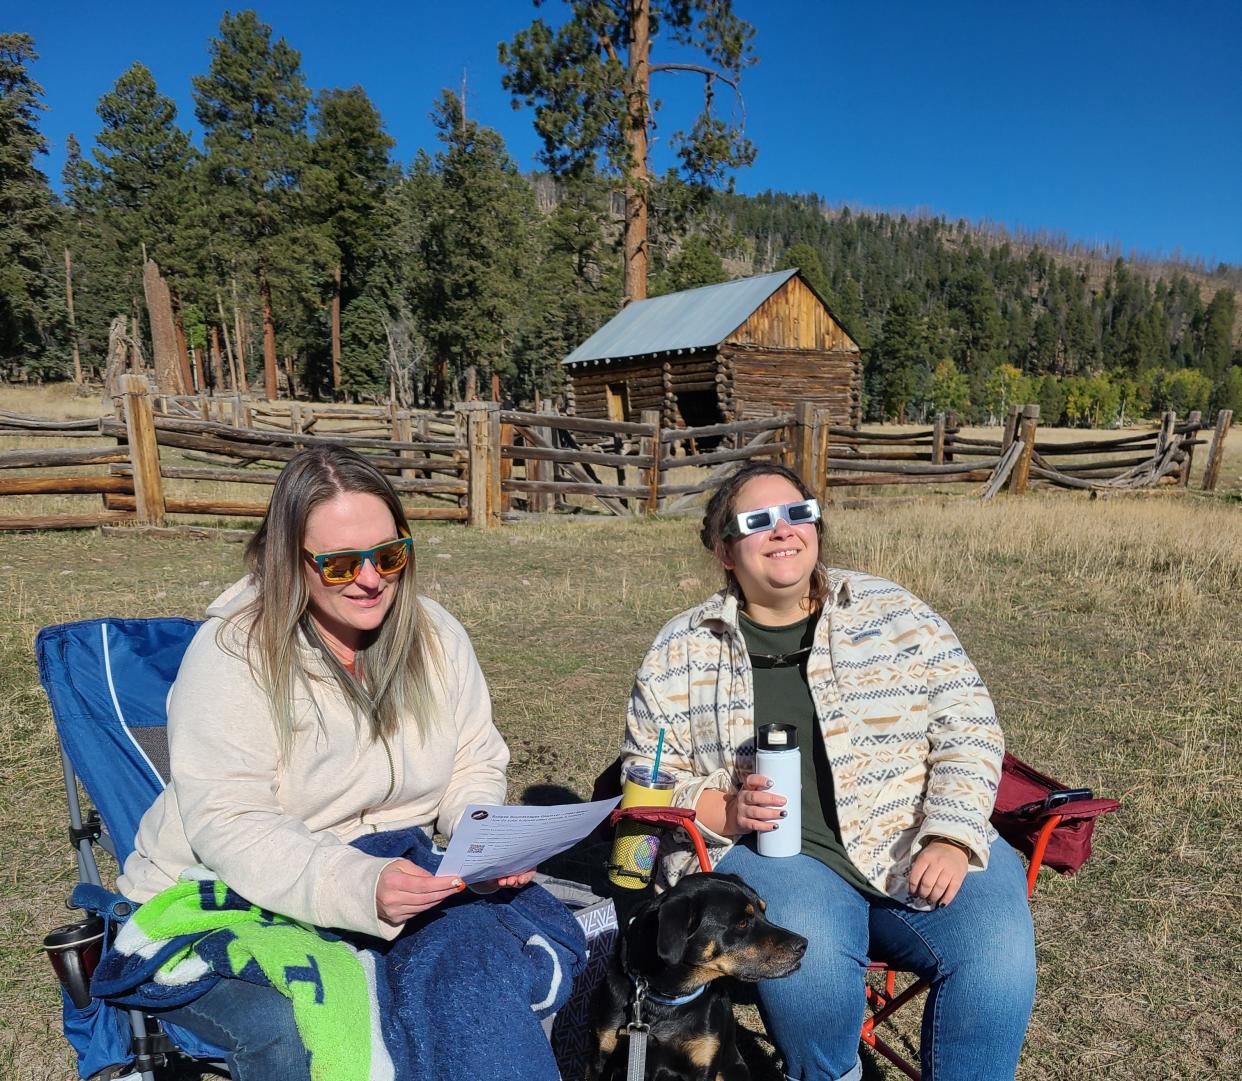 Eclipse Soundscapes observers will take notes on what they hear, see or feel during the April 8, 2024, total solar eclipse. These observers took notes in Valles Caldera National Preserve during the Oct. 14, 2023, annular eclipse.